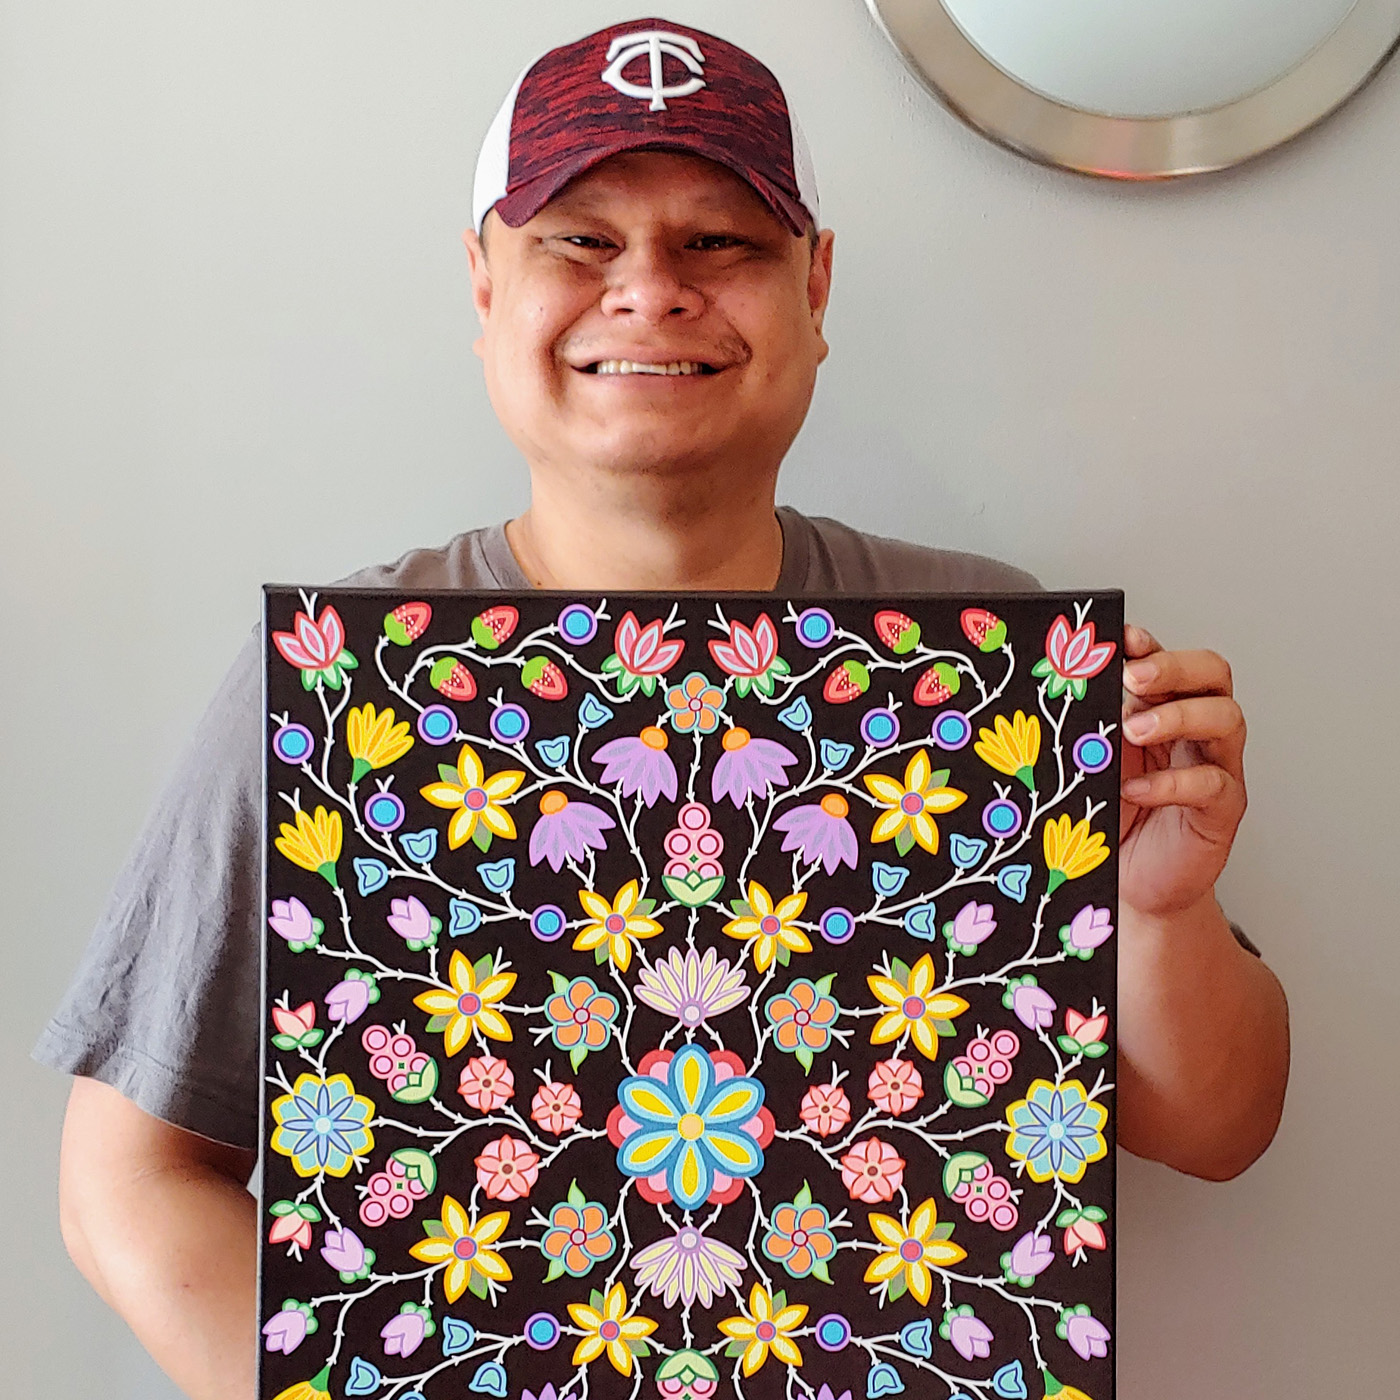 A photograph of Bill Brien wearing a ball cap and smiling while holding one of his paintings based off his Berries, Bee’s and Beauty design. The painting depicts a colorful canvas of yellow, blue and purple flowers, small strawberries and other natural elements in a symmetrical layout over a black background.